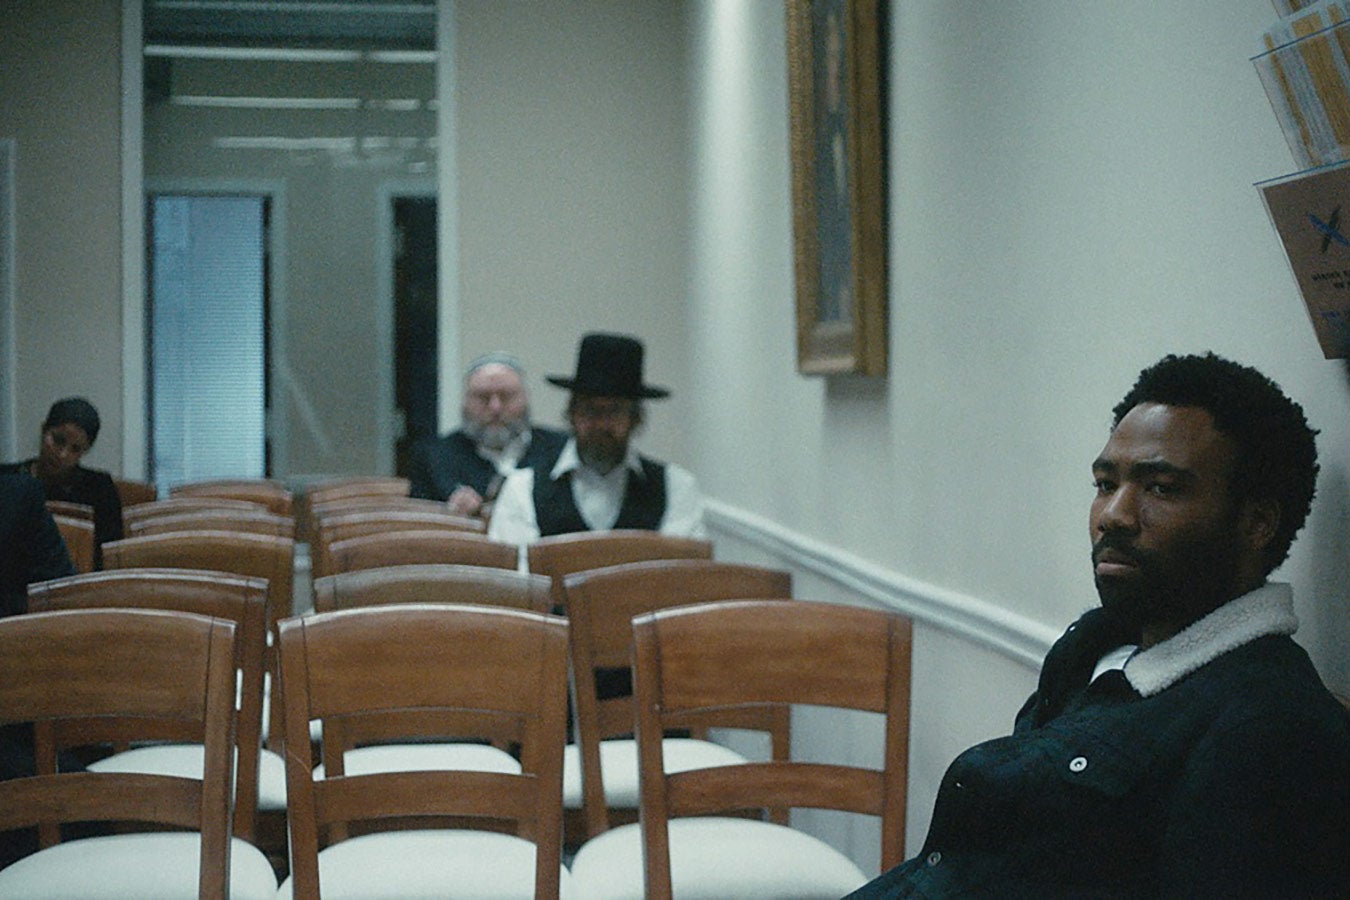 Donald Glover sits in a mostly empty waiting room looking pensive.